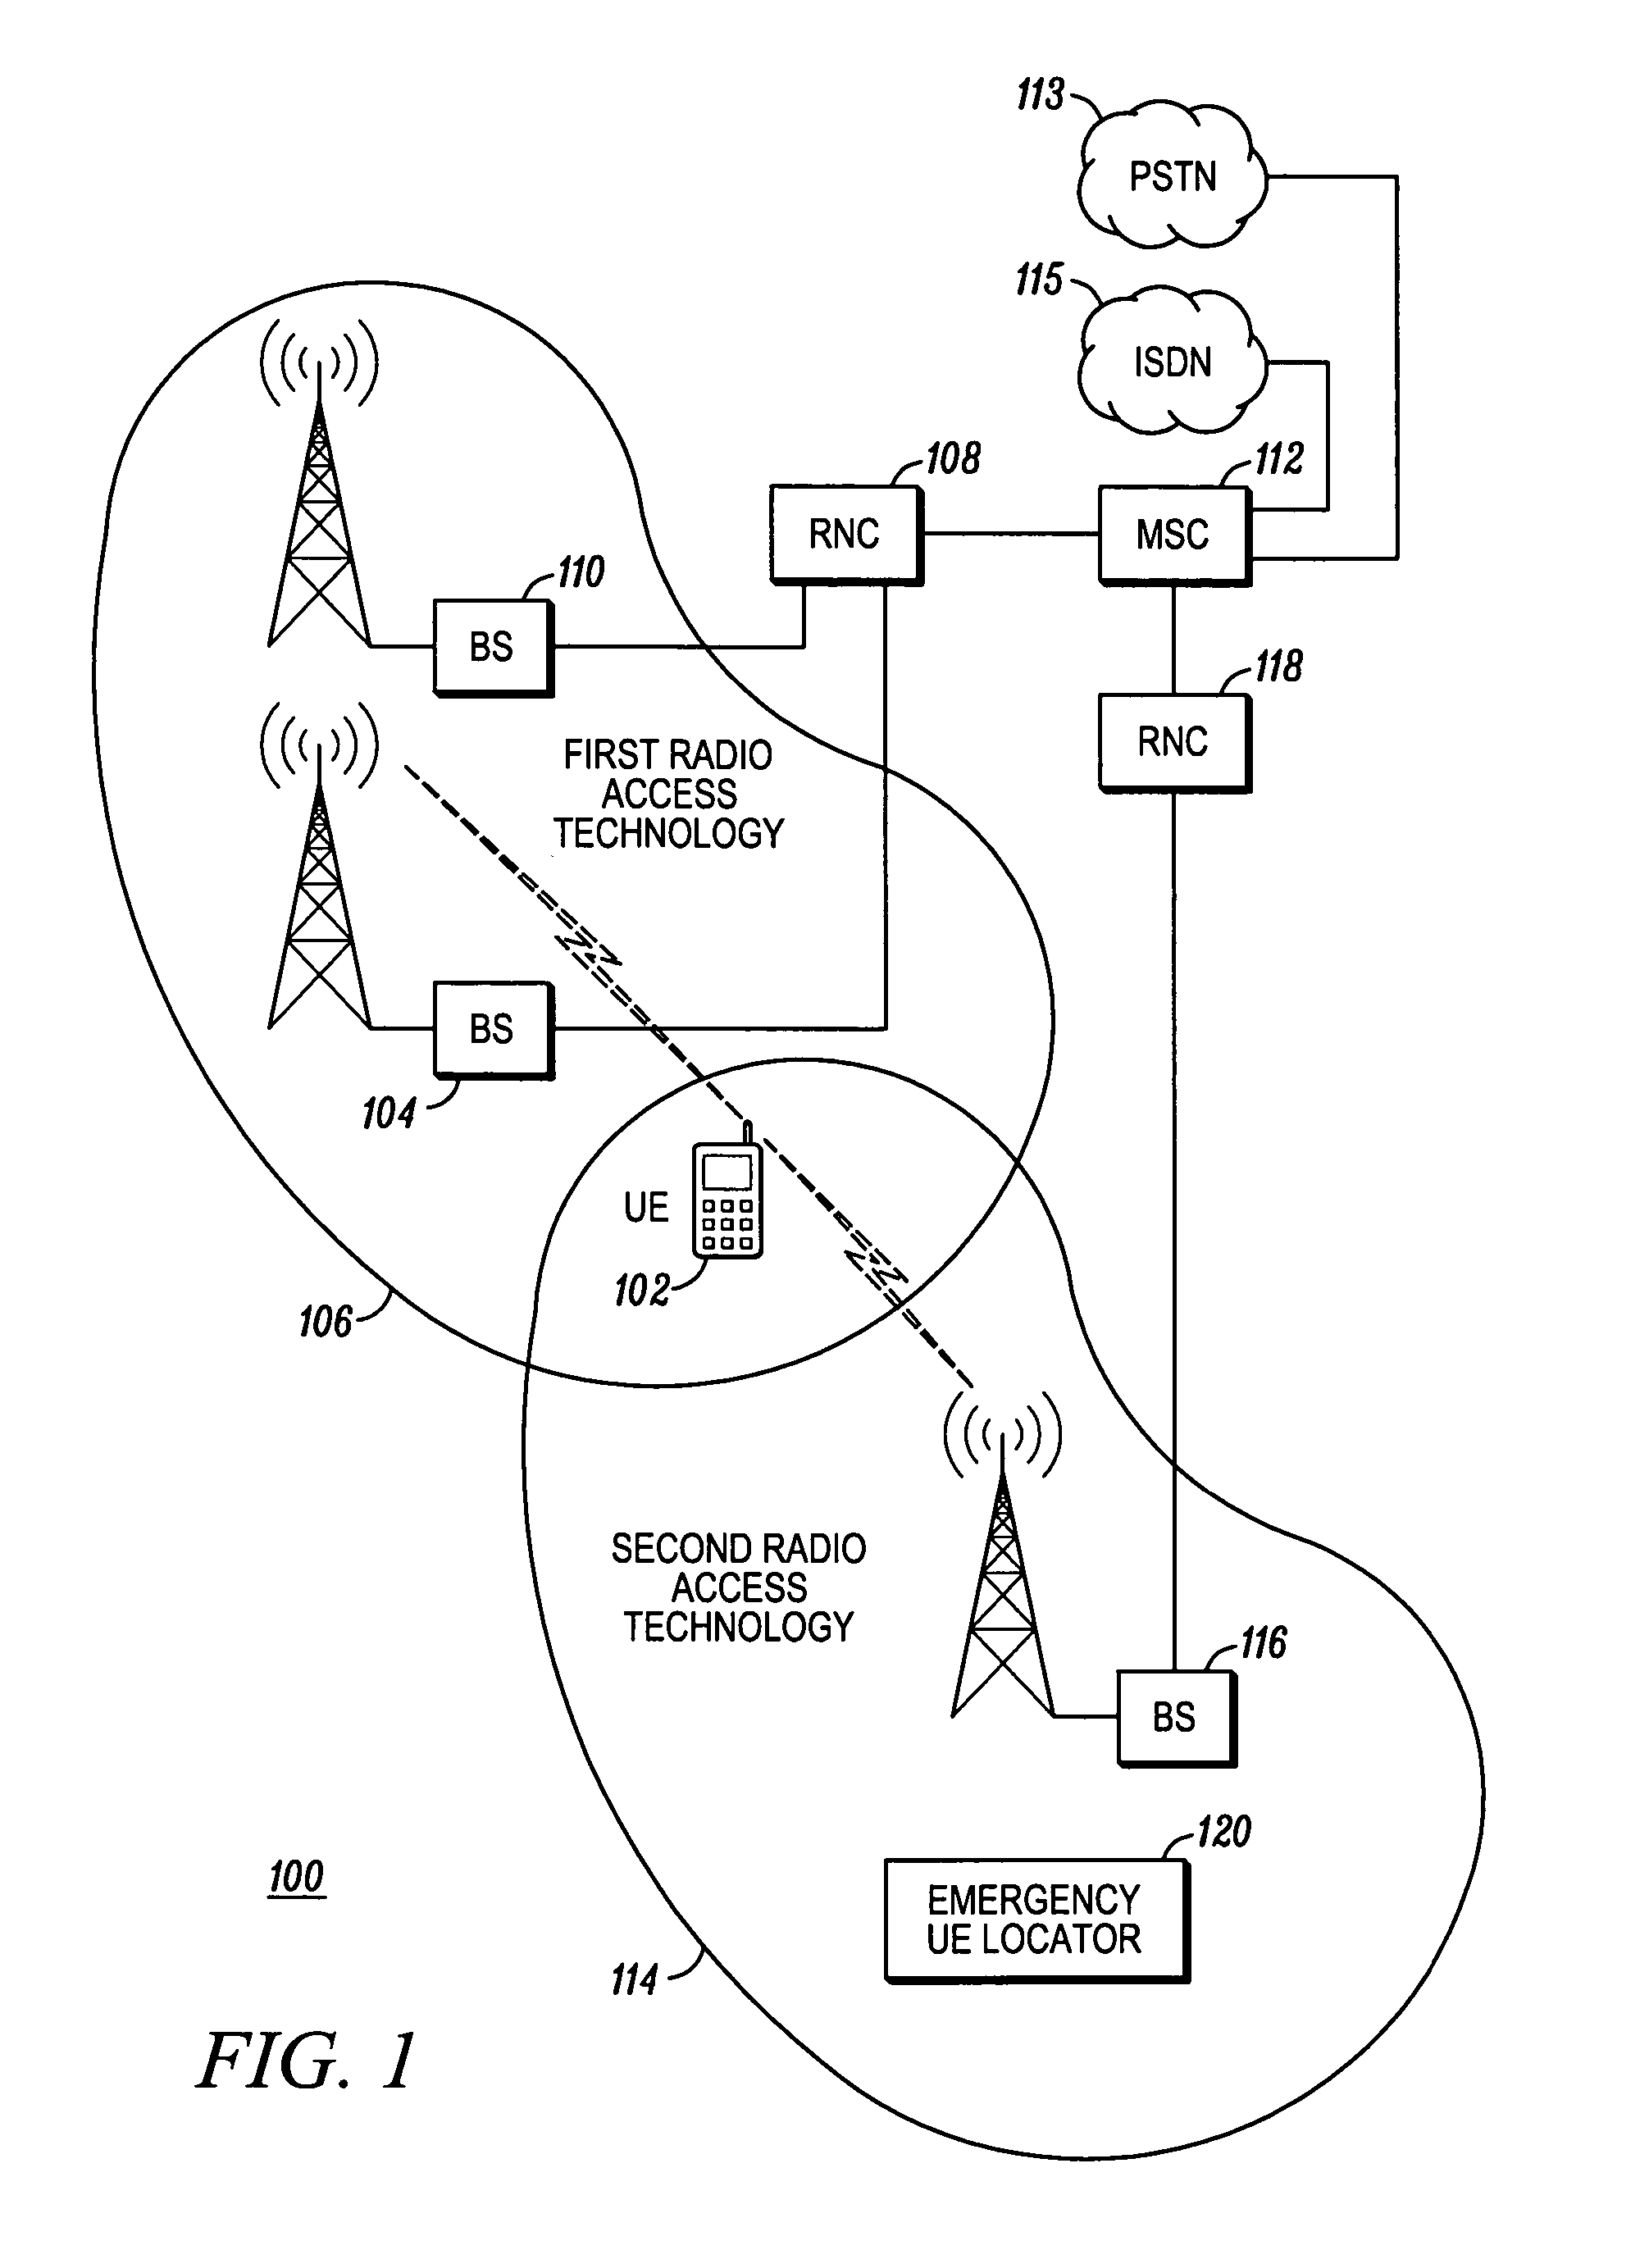 Methods and apparatus for placement of an emergency call